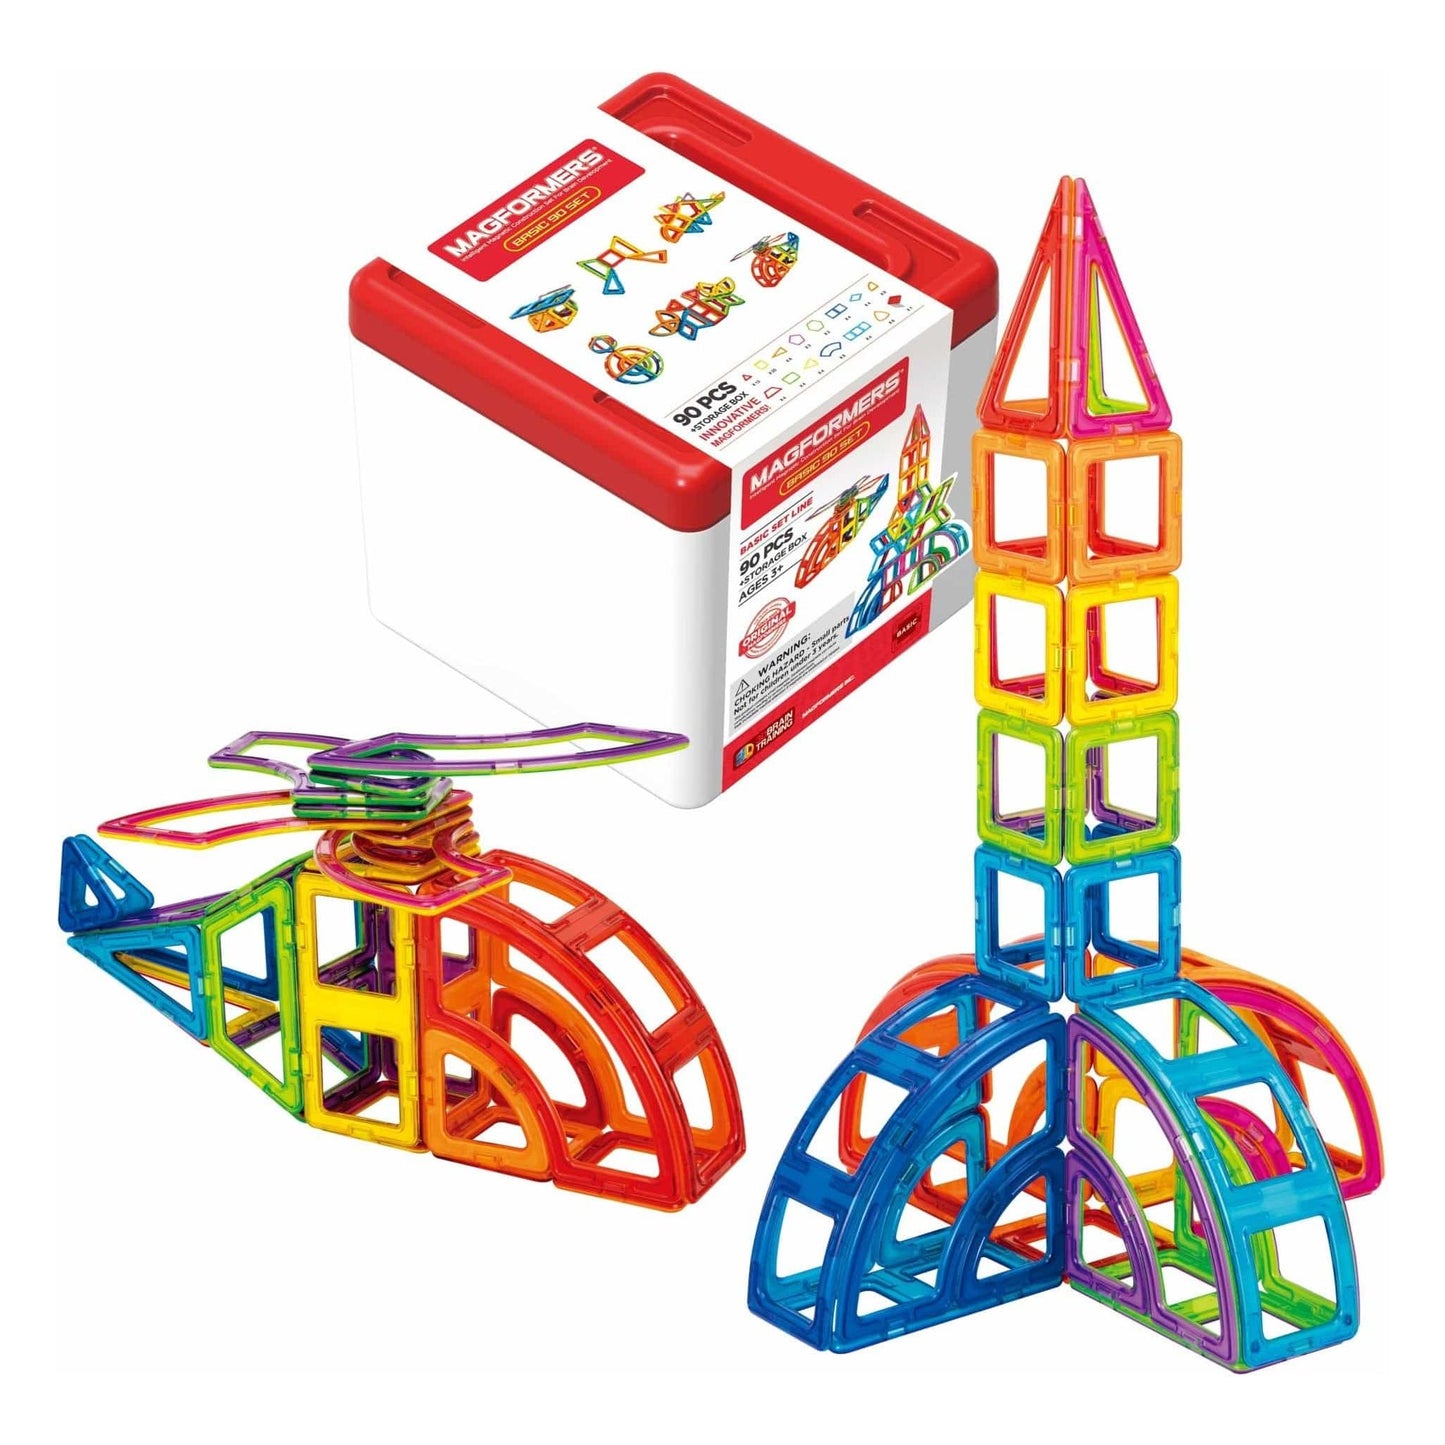 Magformers Construction Toy 90 Piece Set + Storage Box